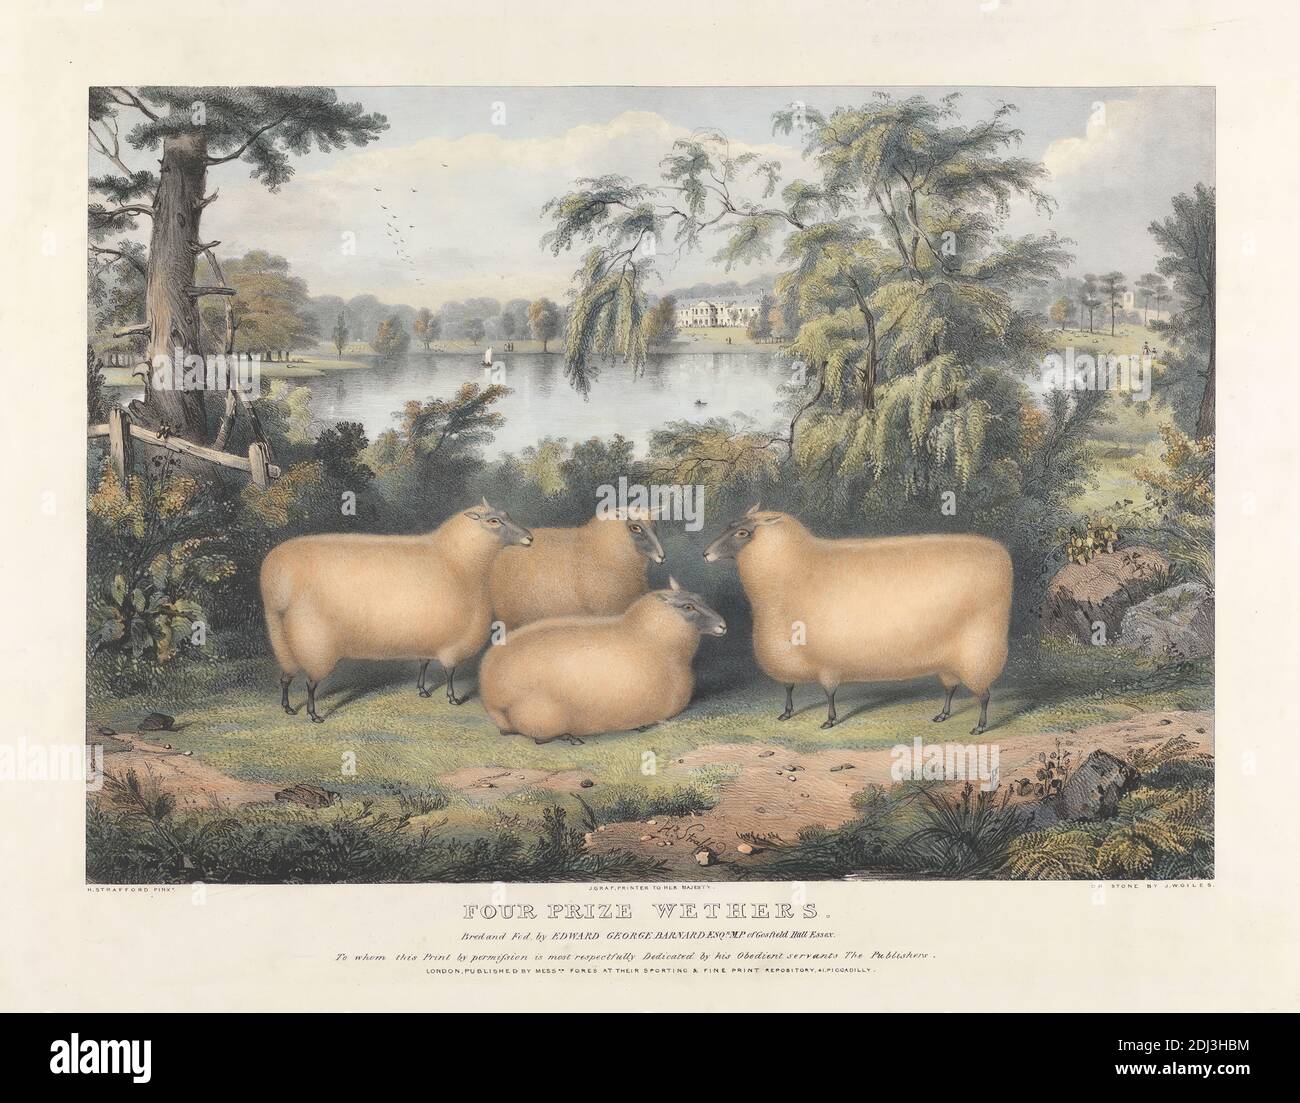 Four Prize Wethers, Print made by John West Giles, active 1827–1865, after Henry Strafford, active 1833–1873, 1837, Lithograph with hand coloring on thick, slightly textured, cream wove paper, Sheet: 18 x 22 3/4 inches (45.7 x 57.8 cm) and Image: 14 x 19 3/4 inches (35.6 x 50.2 cm), agronomy, animal art, ewe (animal), farming, husbandry, obesity, science Stock Photo